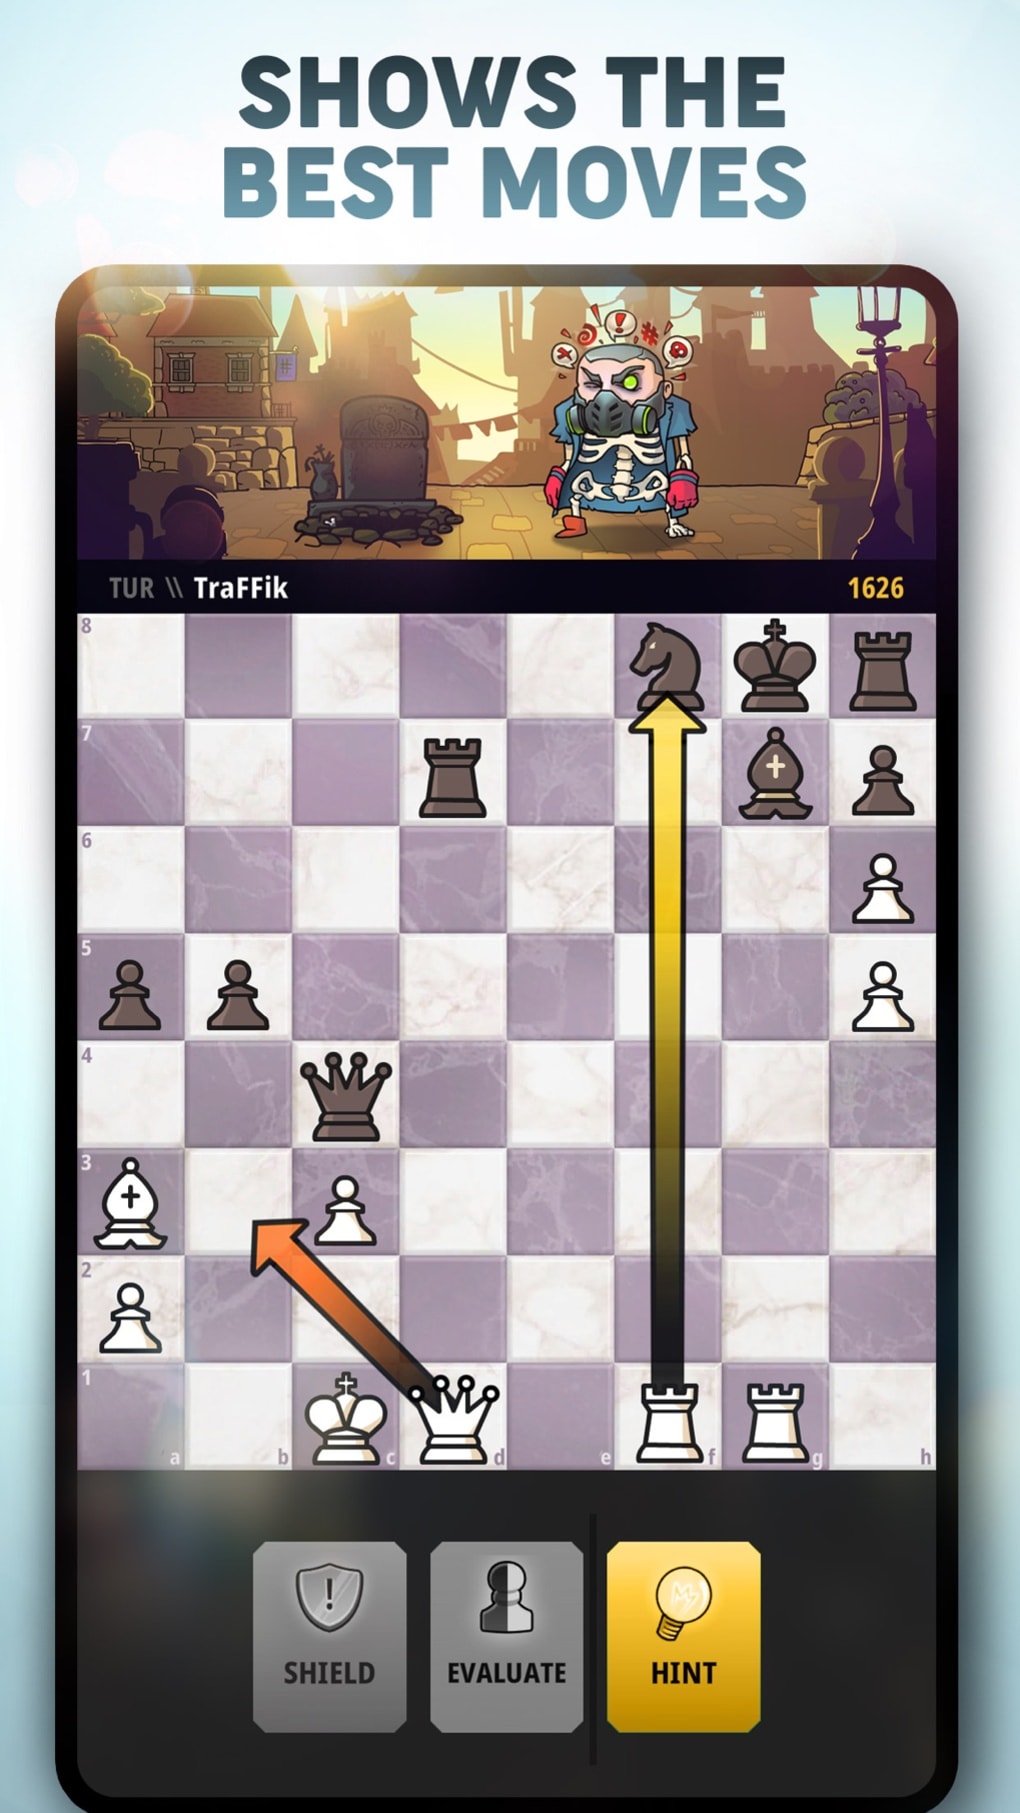 Chess Universe - online games by Tilting Point LLC